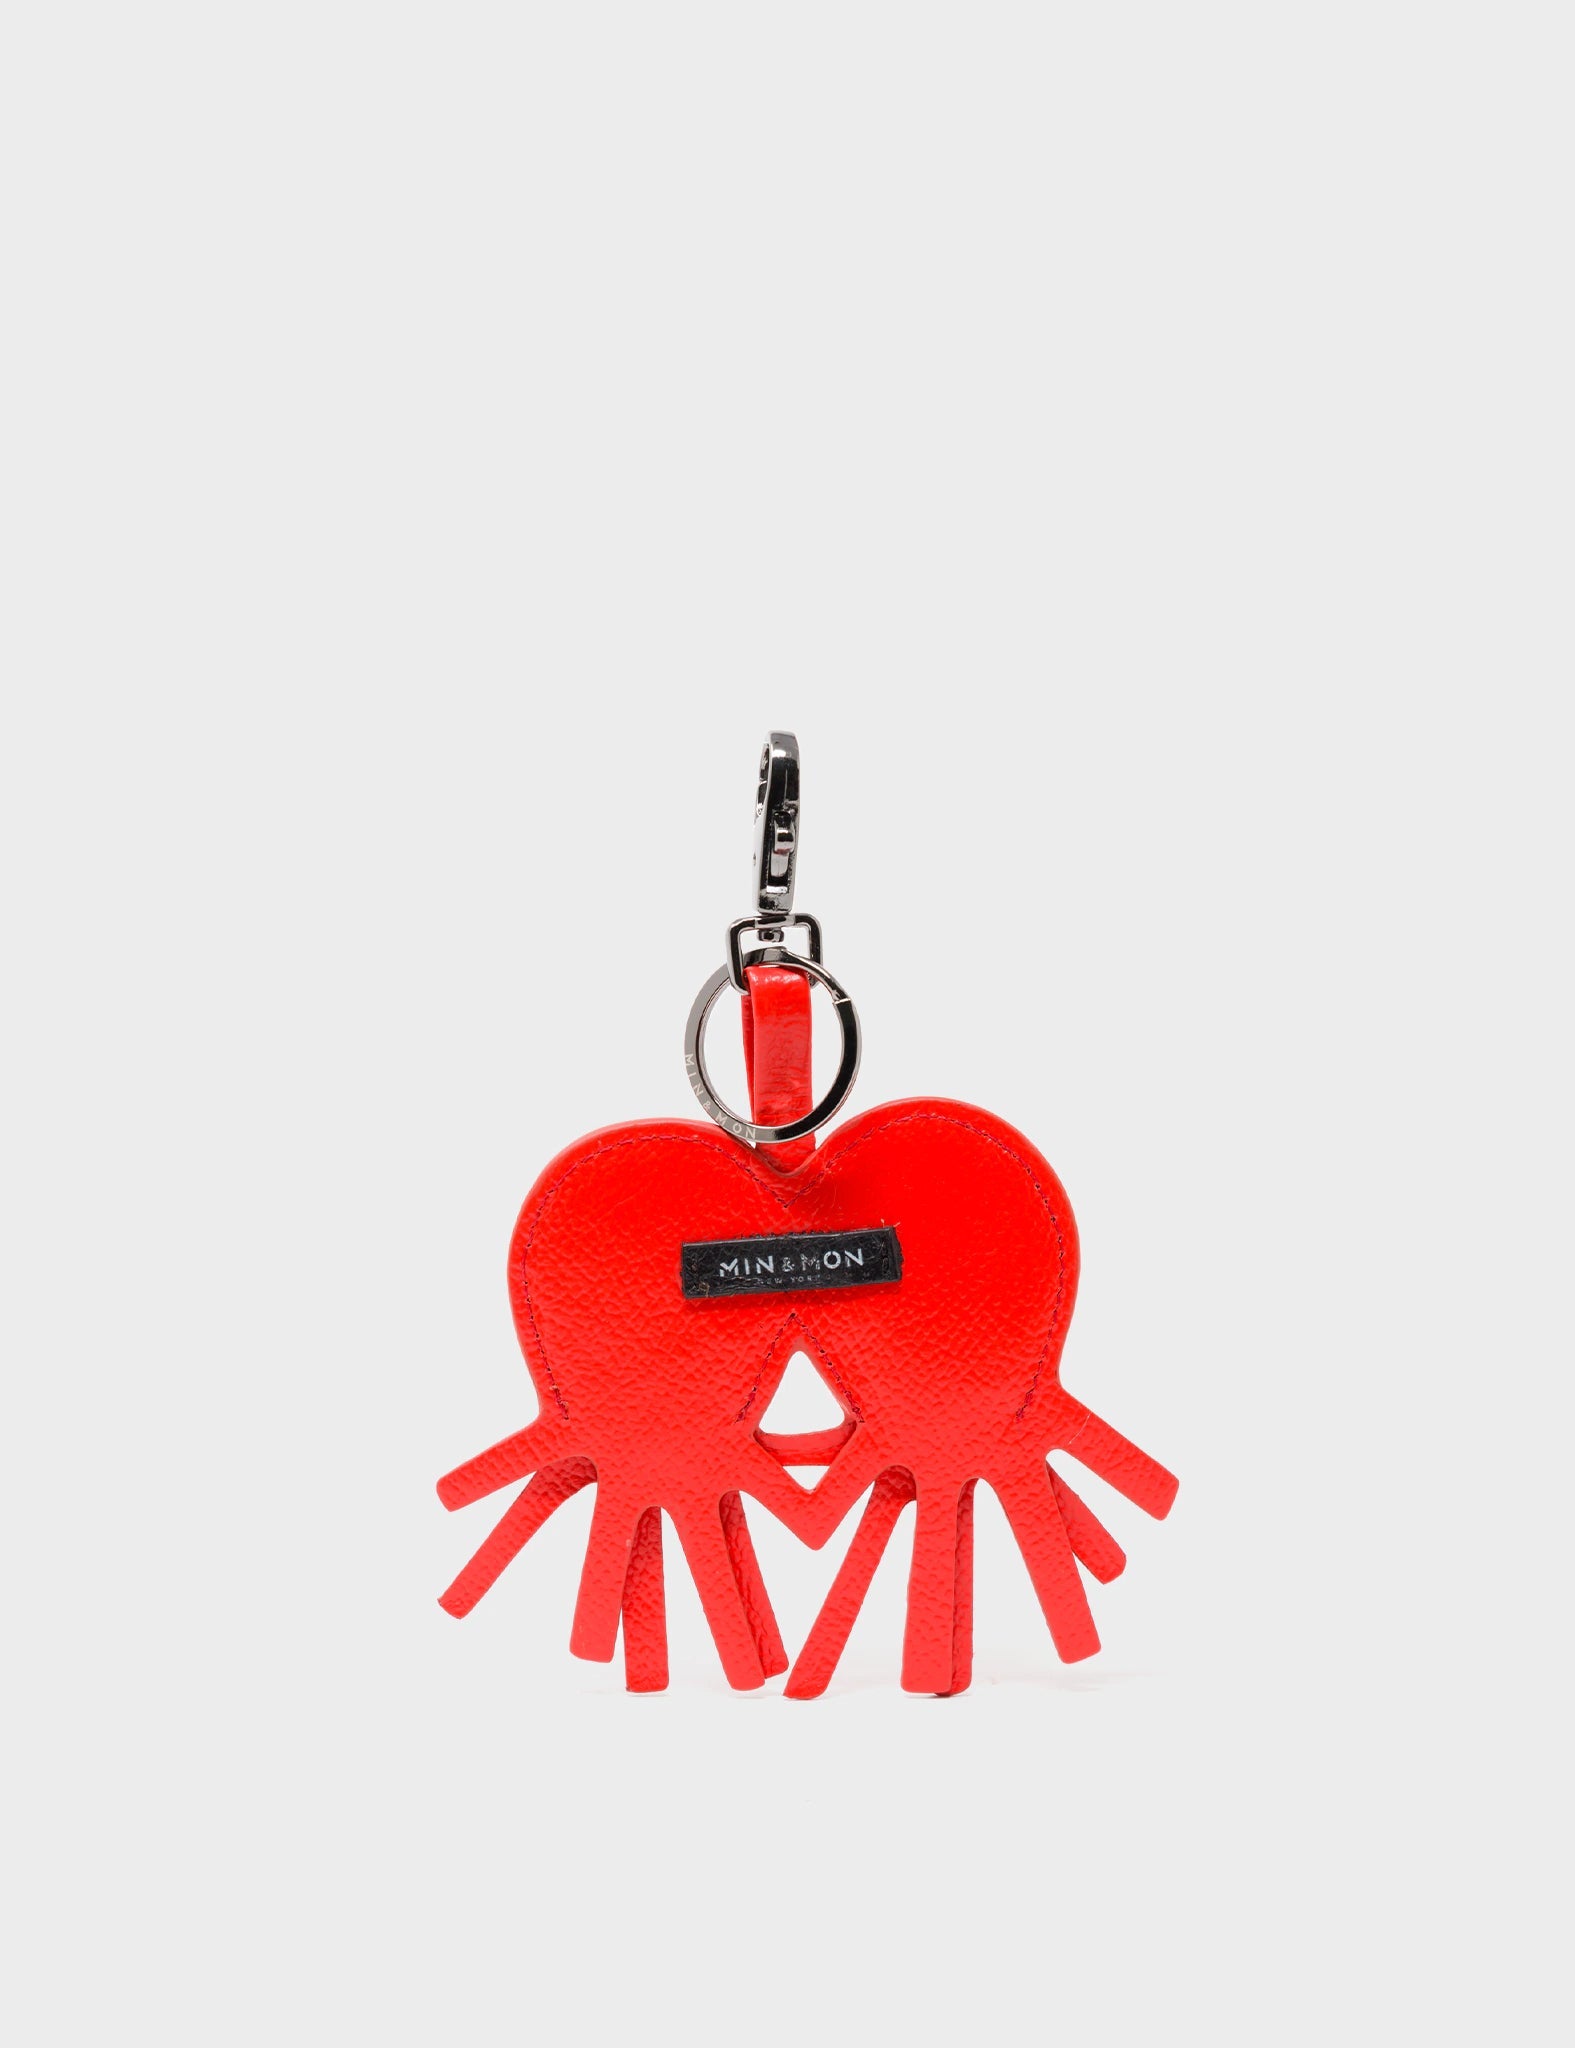 Octopus Charm - Fiesta Red Leather Keychain - Back